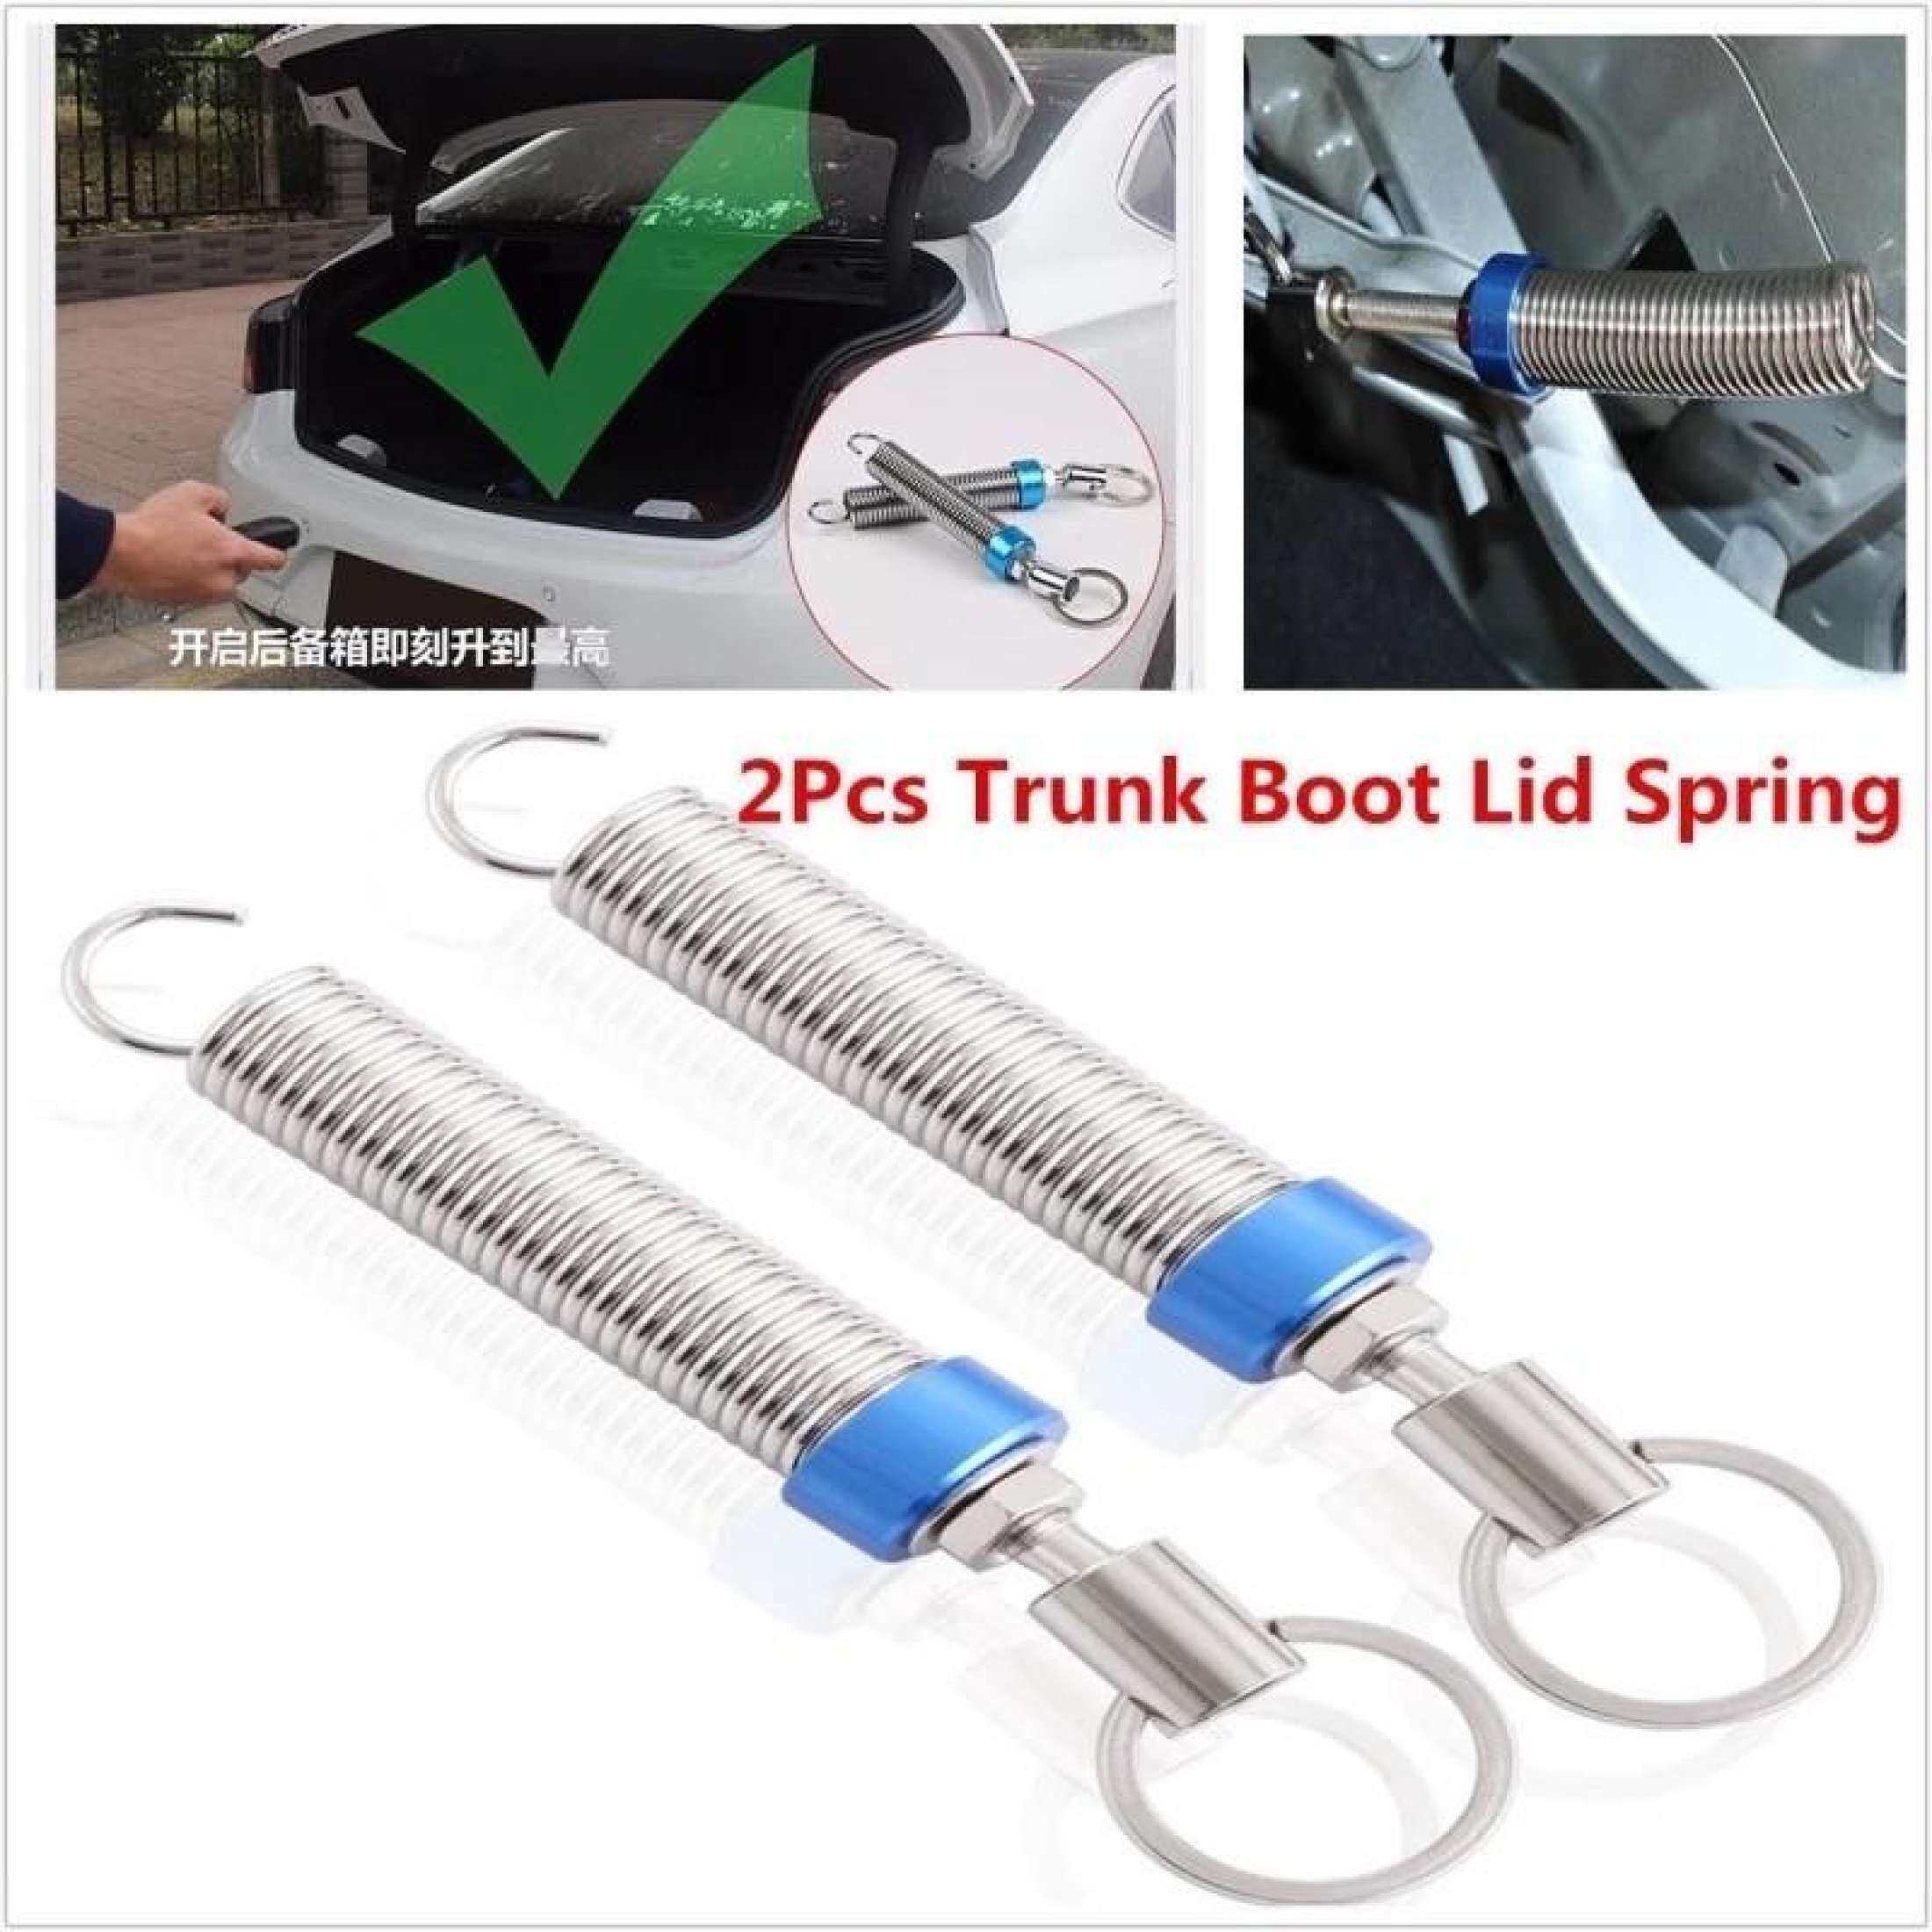 1 Piece of Car Trunk Trunk Lid Lift Universal Car Spring Device